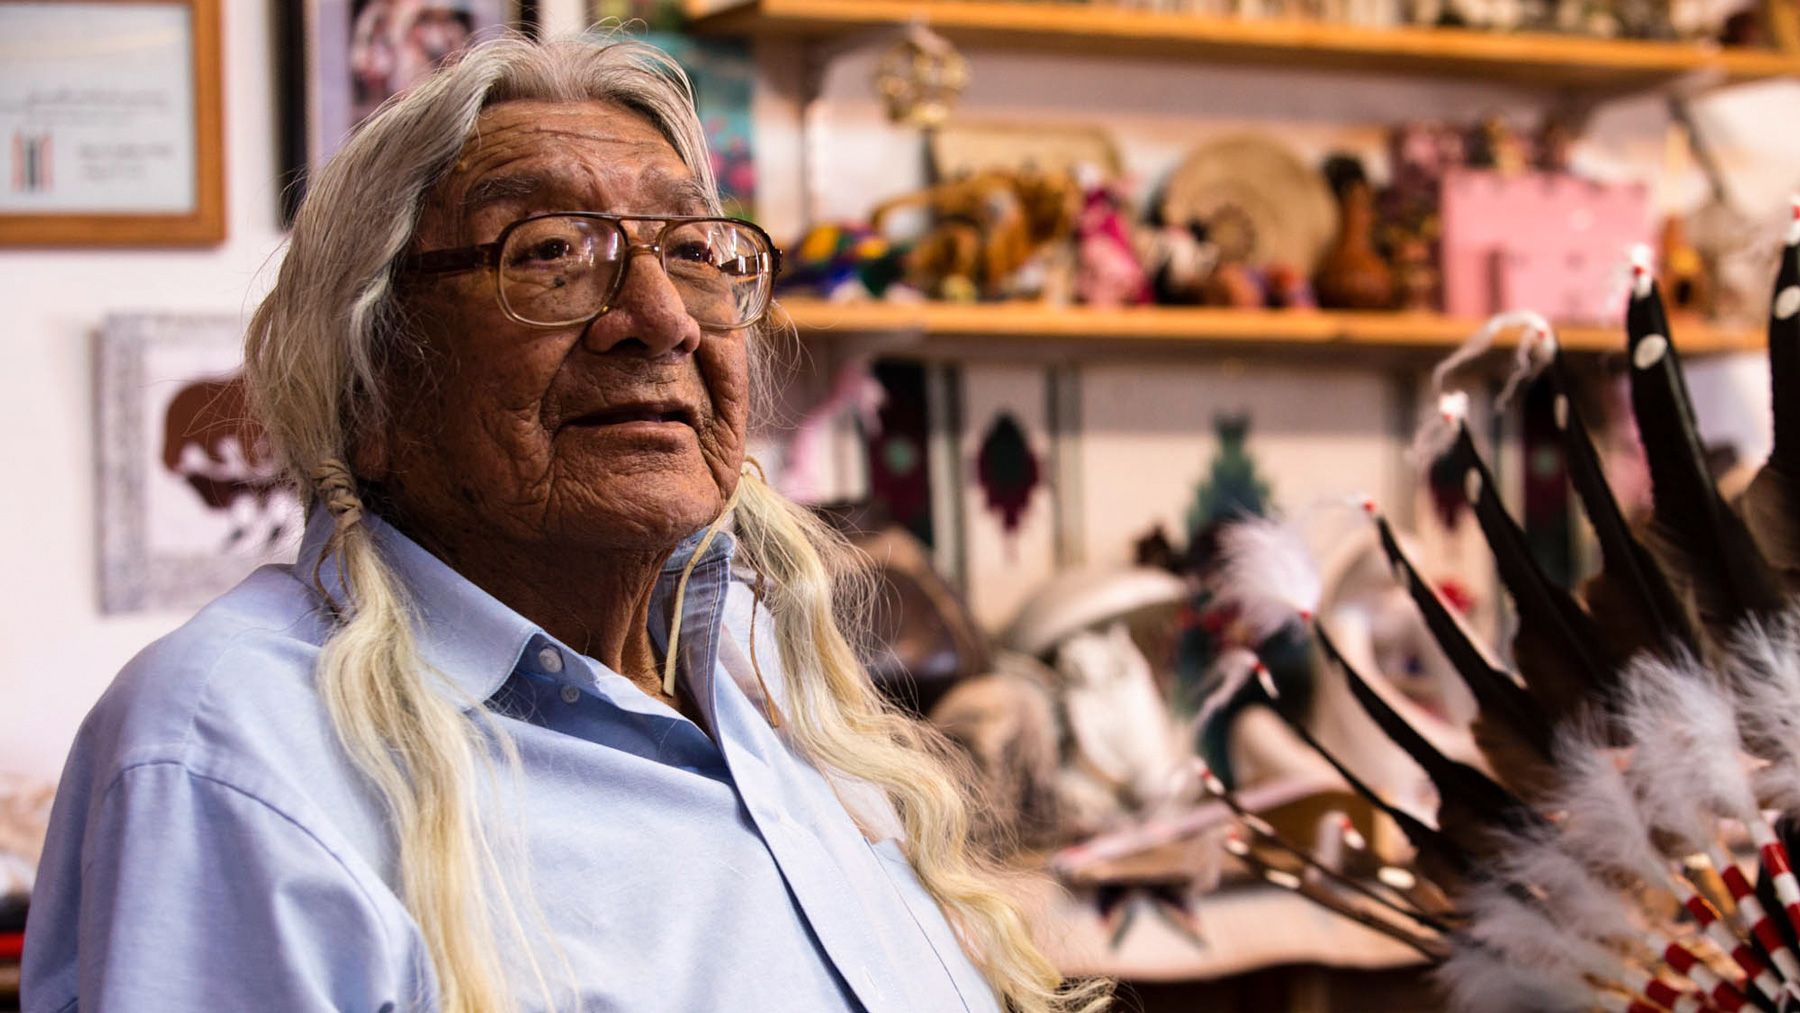 Mark Soldier Wolf of the Arapaho Nation is the father of 10 children and a veteran of the Korean War. He said he was kicked off his land to make way for a uranium mill. (Lauren Kaljur/News21)